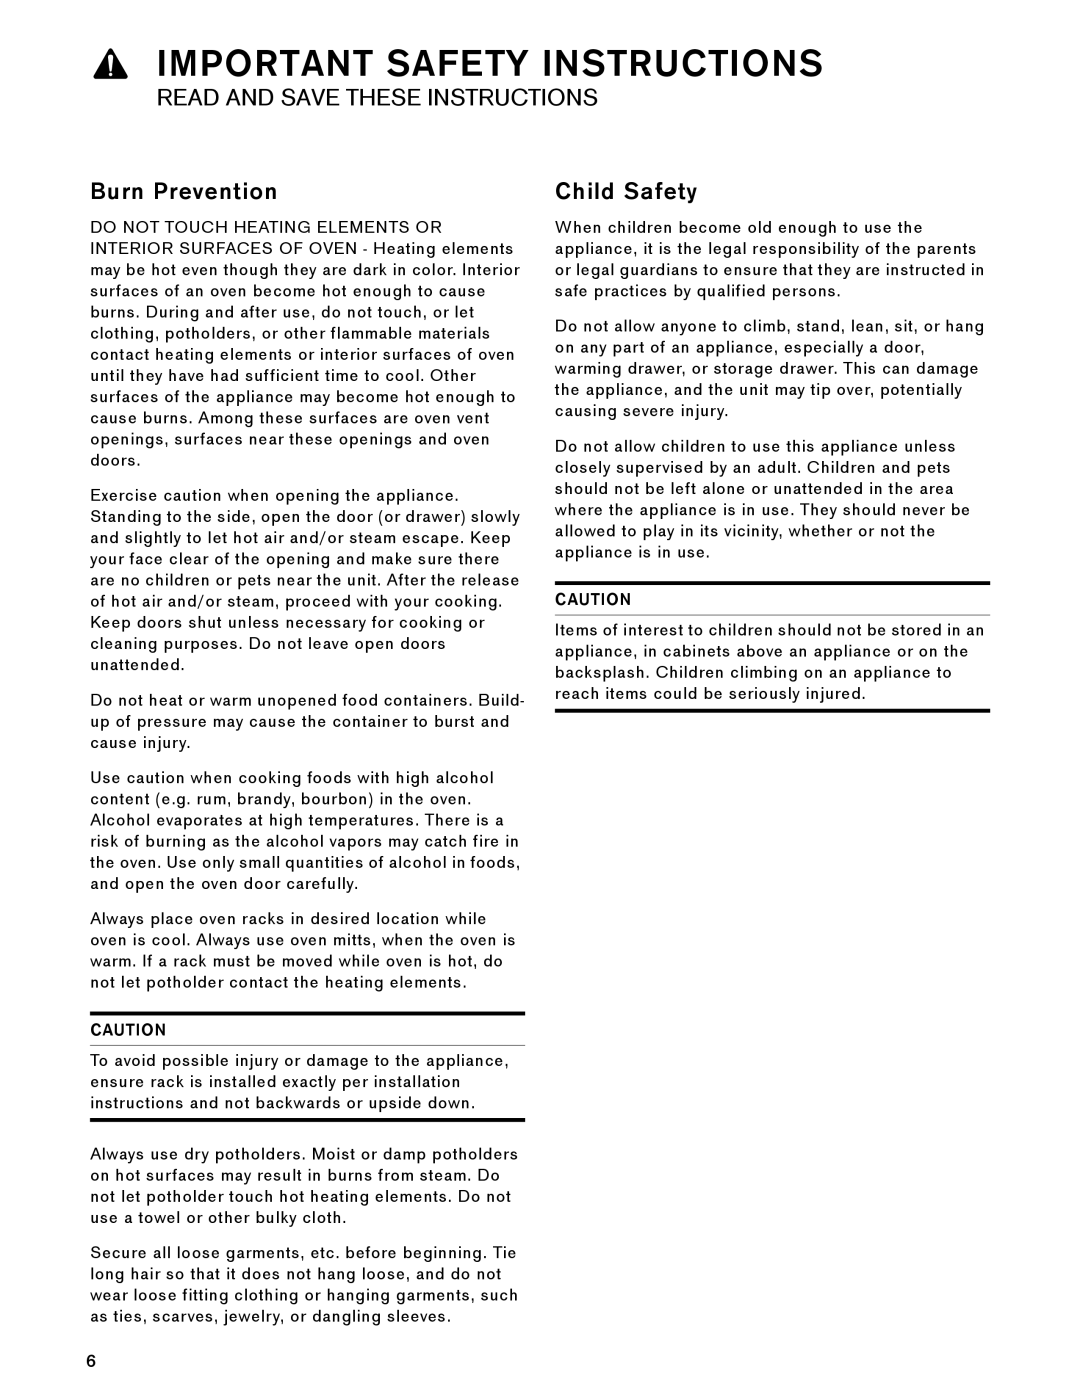 Gaggenau BX 480/481 610 Burn Prevention, Child Safety, Important Safety Instructions, Read And Save These Instructions 